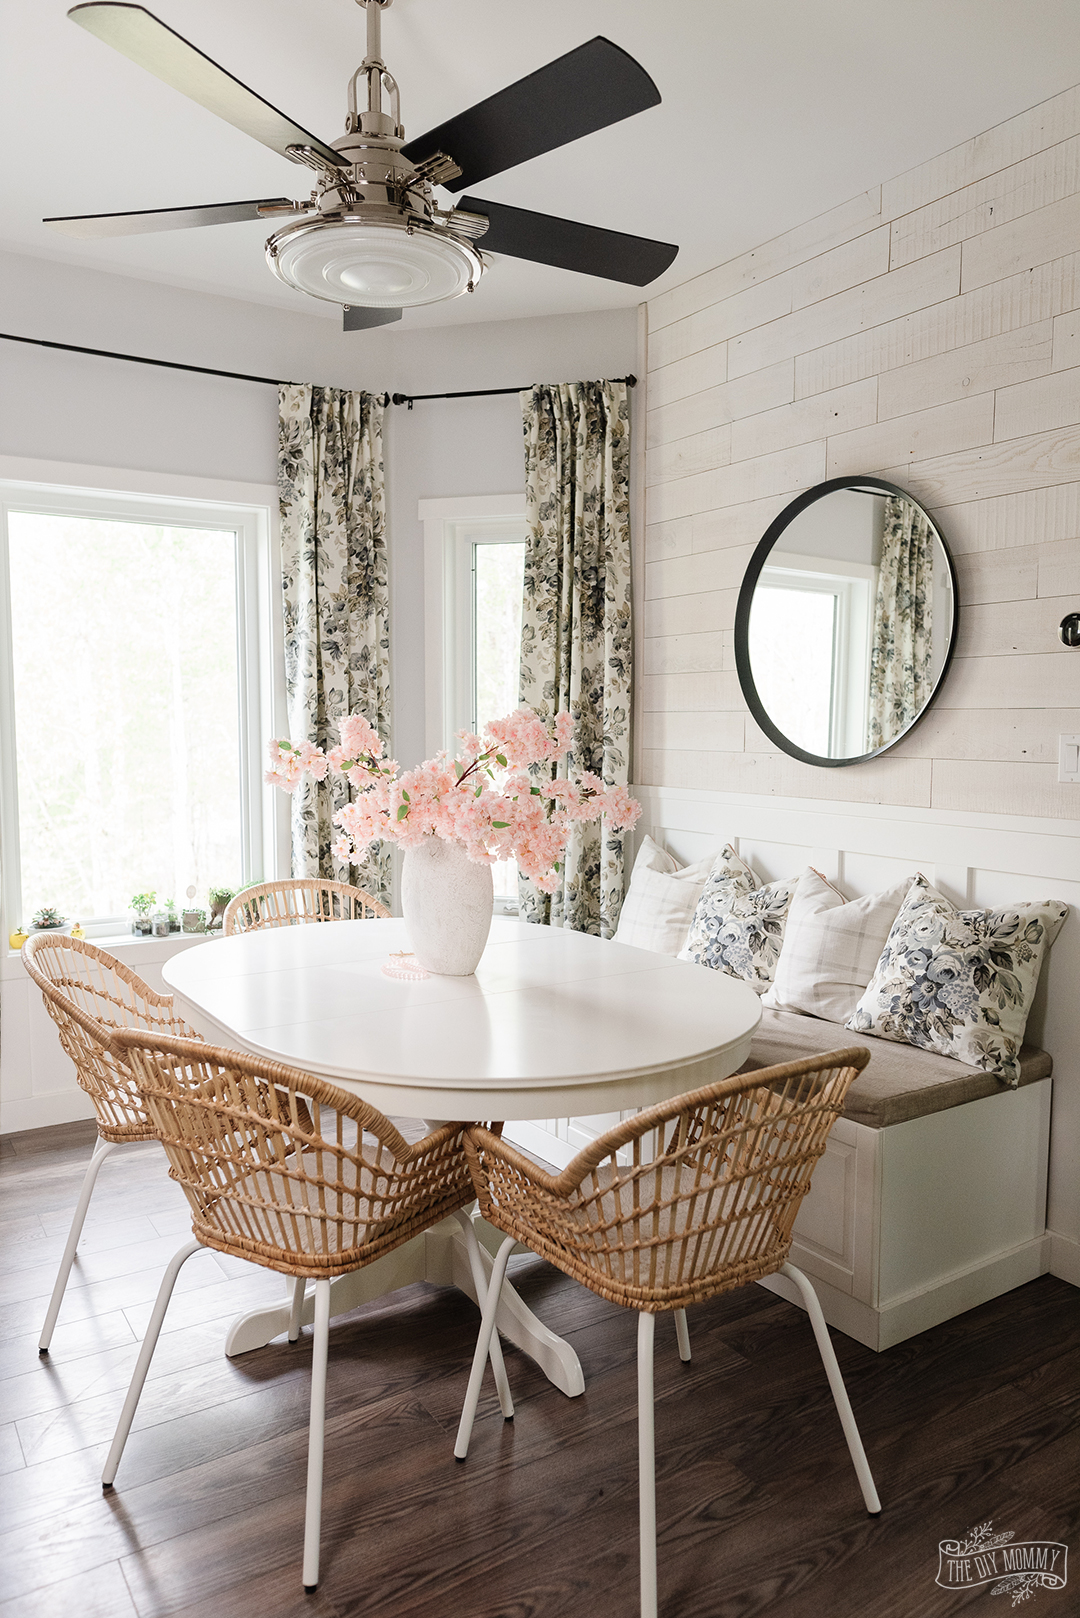 DIY curtains are hanging in a breakfast nook